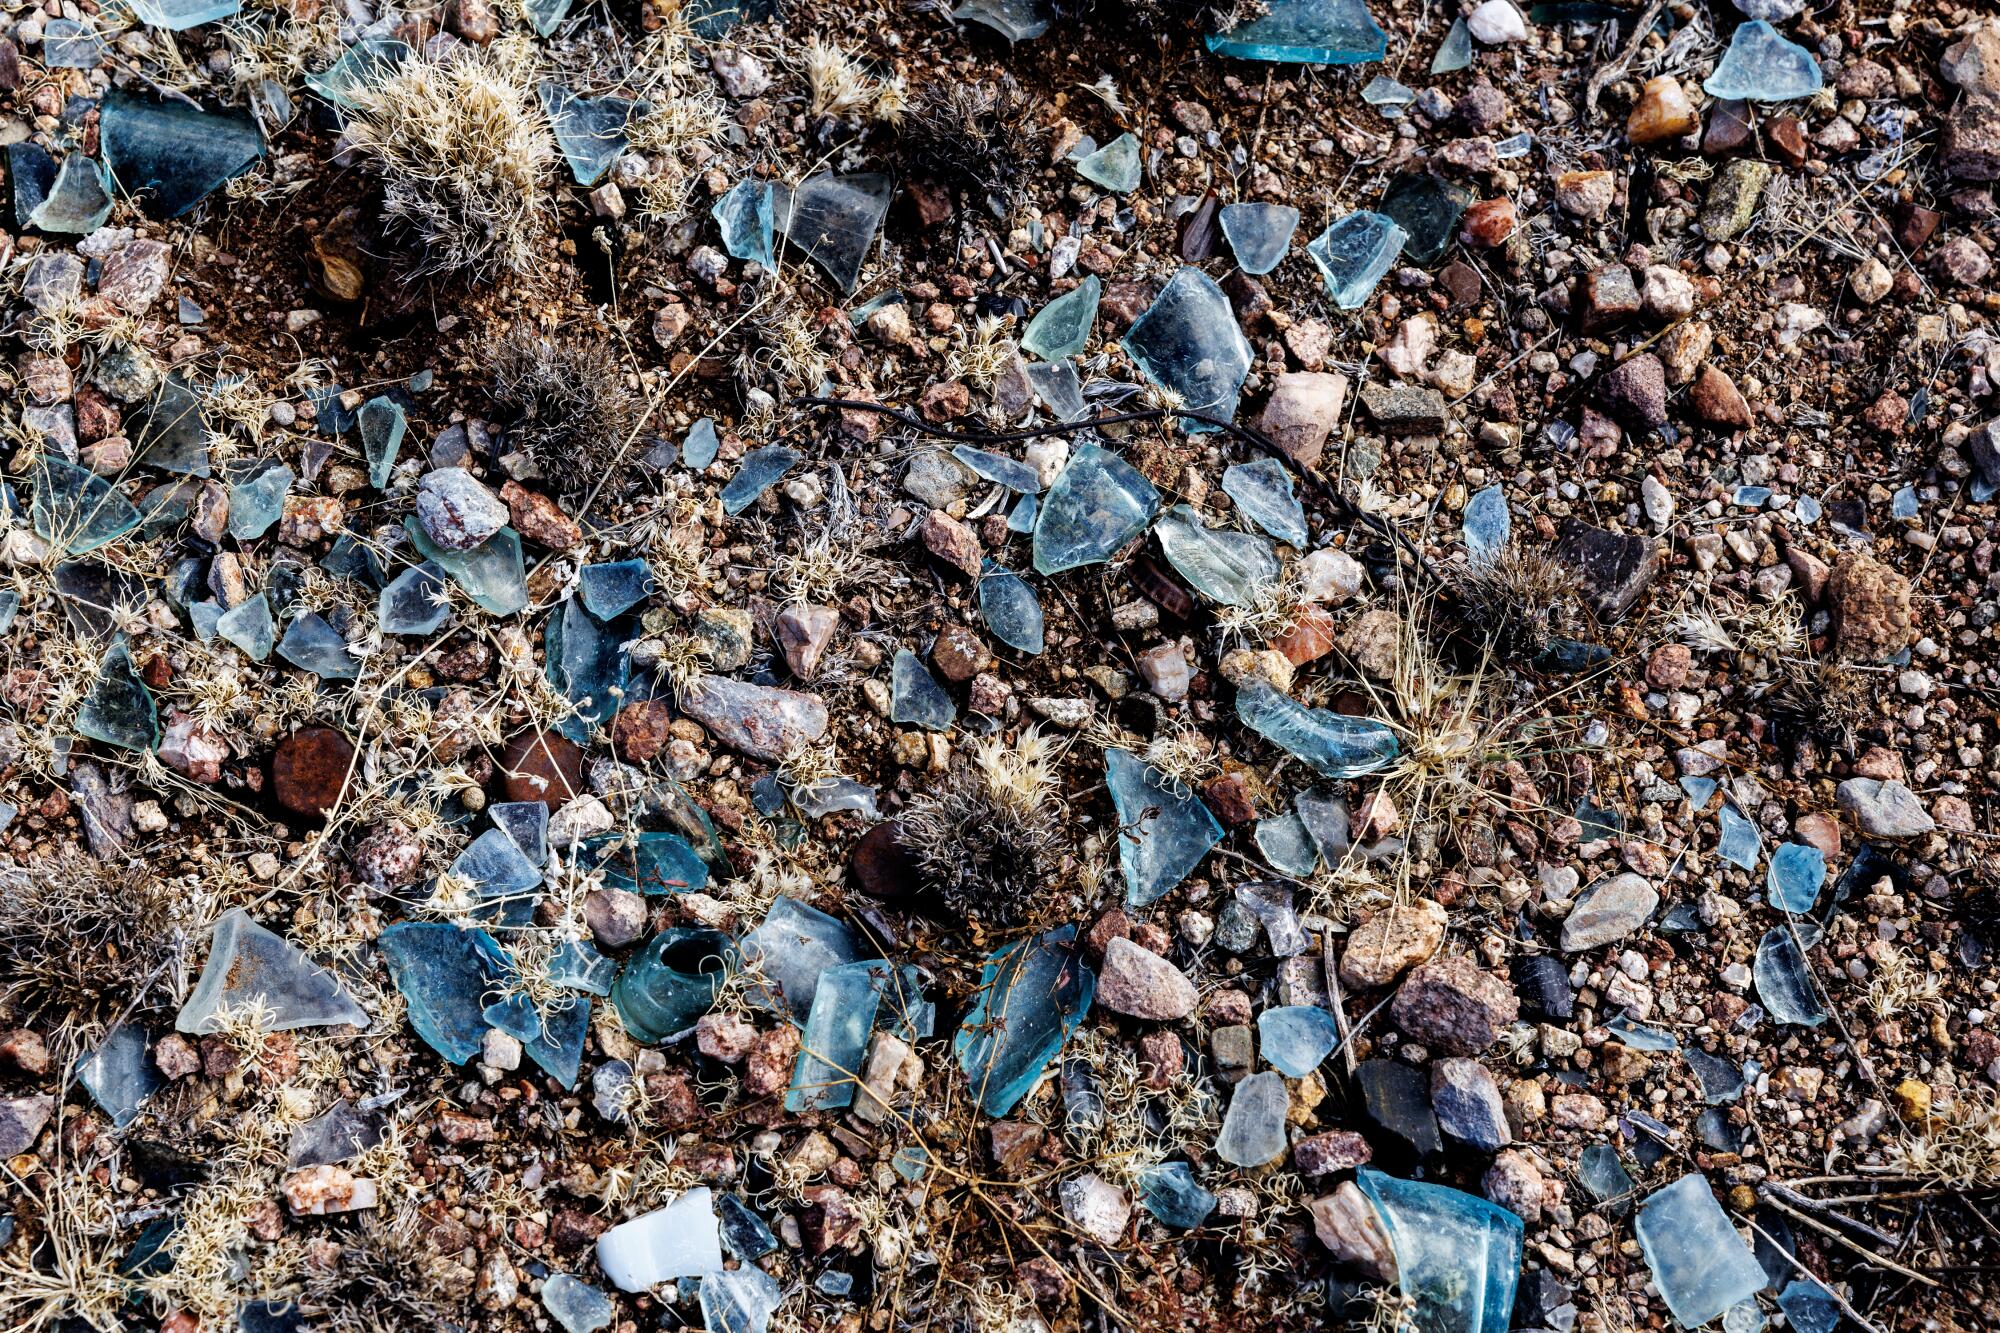 Shards of broken glass lay in course sand.